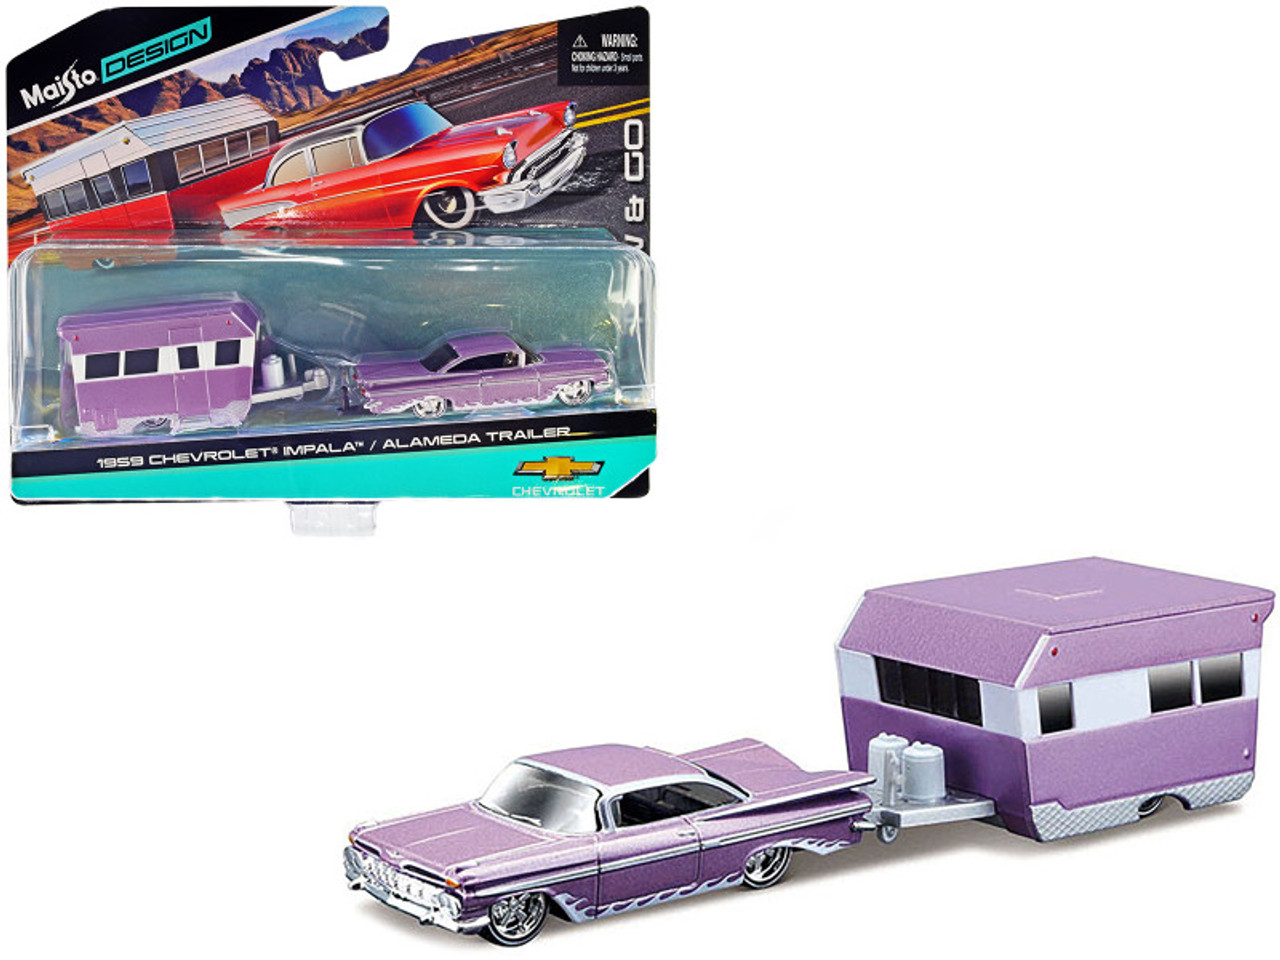 1959 Chevrolet Impala Purple Metallic with White Graphics and Alameda Trailer Purple Metallic and White "Tow & Go" Series 1/64 Diecast Model Car by Maisto